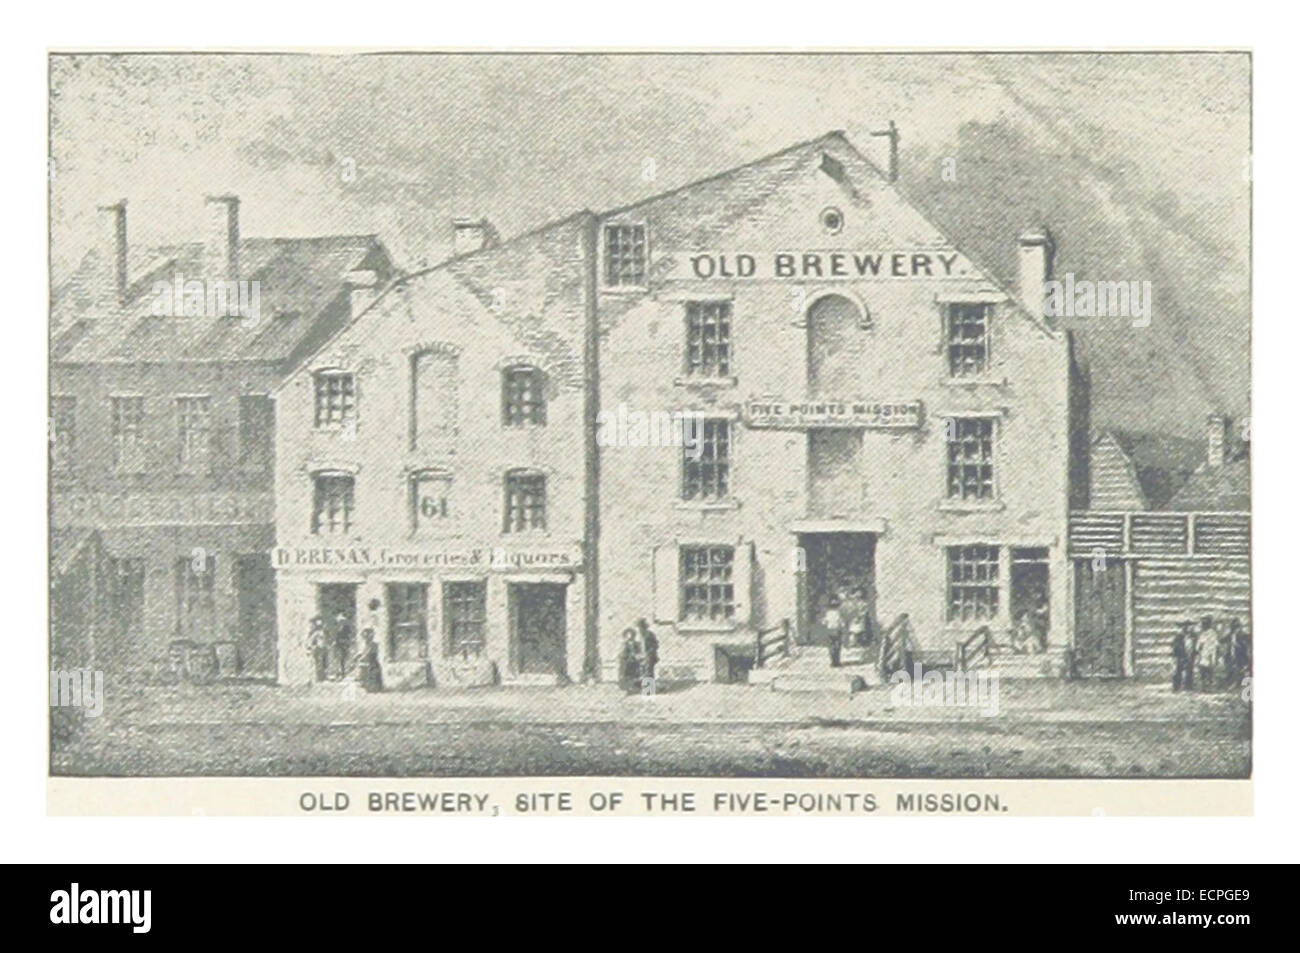 (King1893NYC) pg430 OLD BREWERY, SITE OF THE FIVE-POINTS MISSION Stock Photo